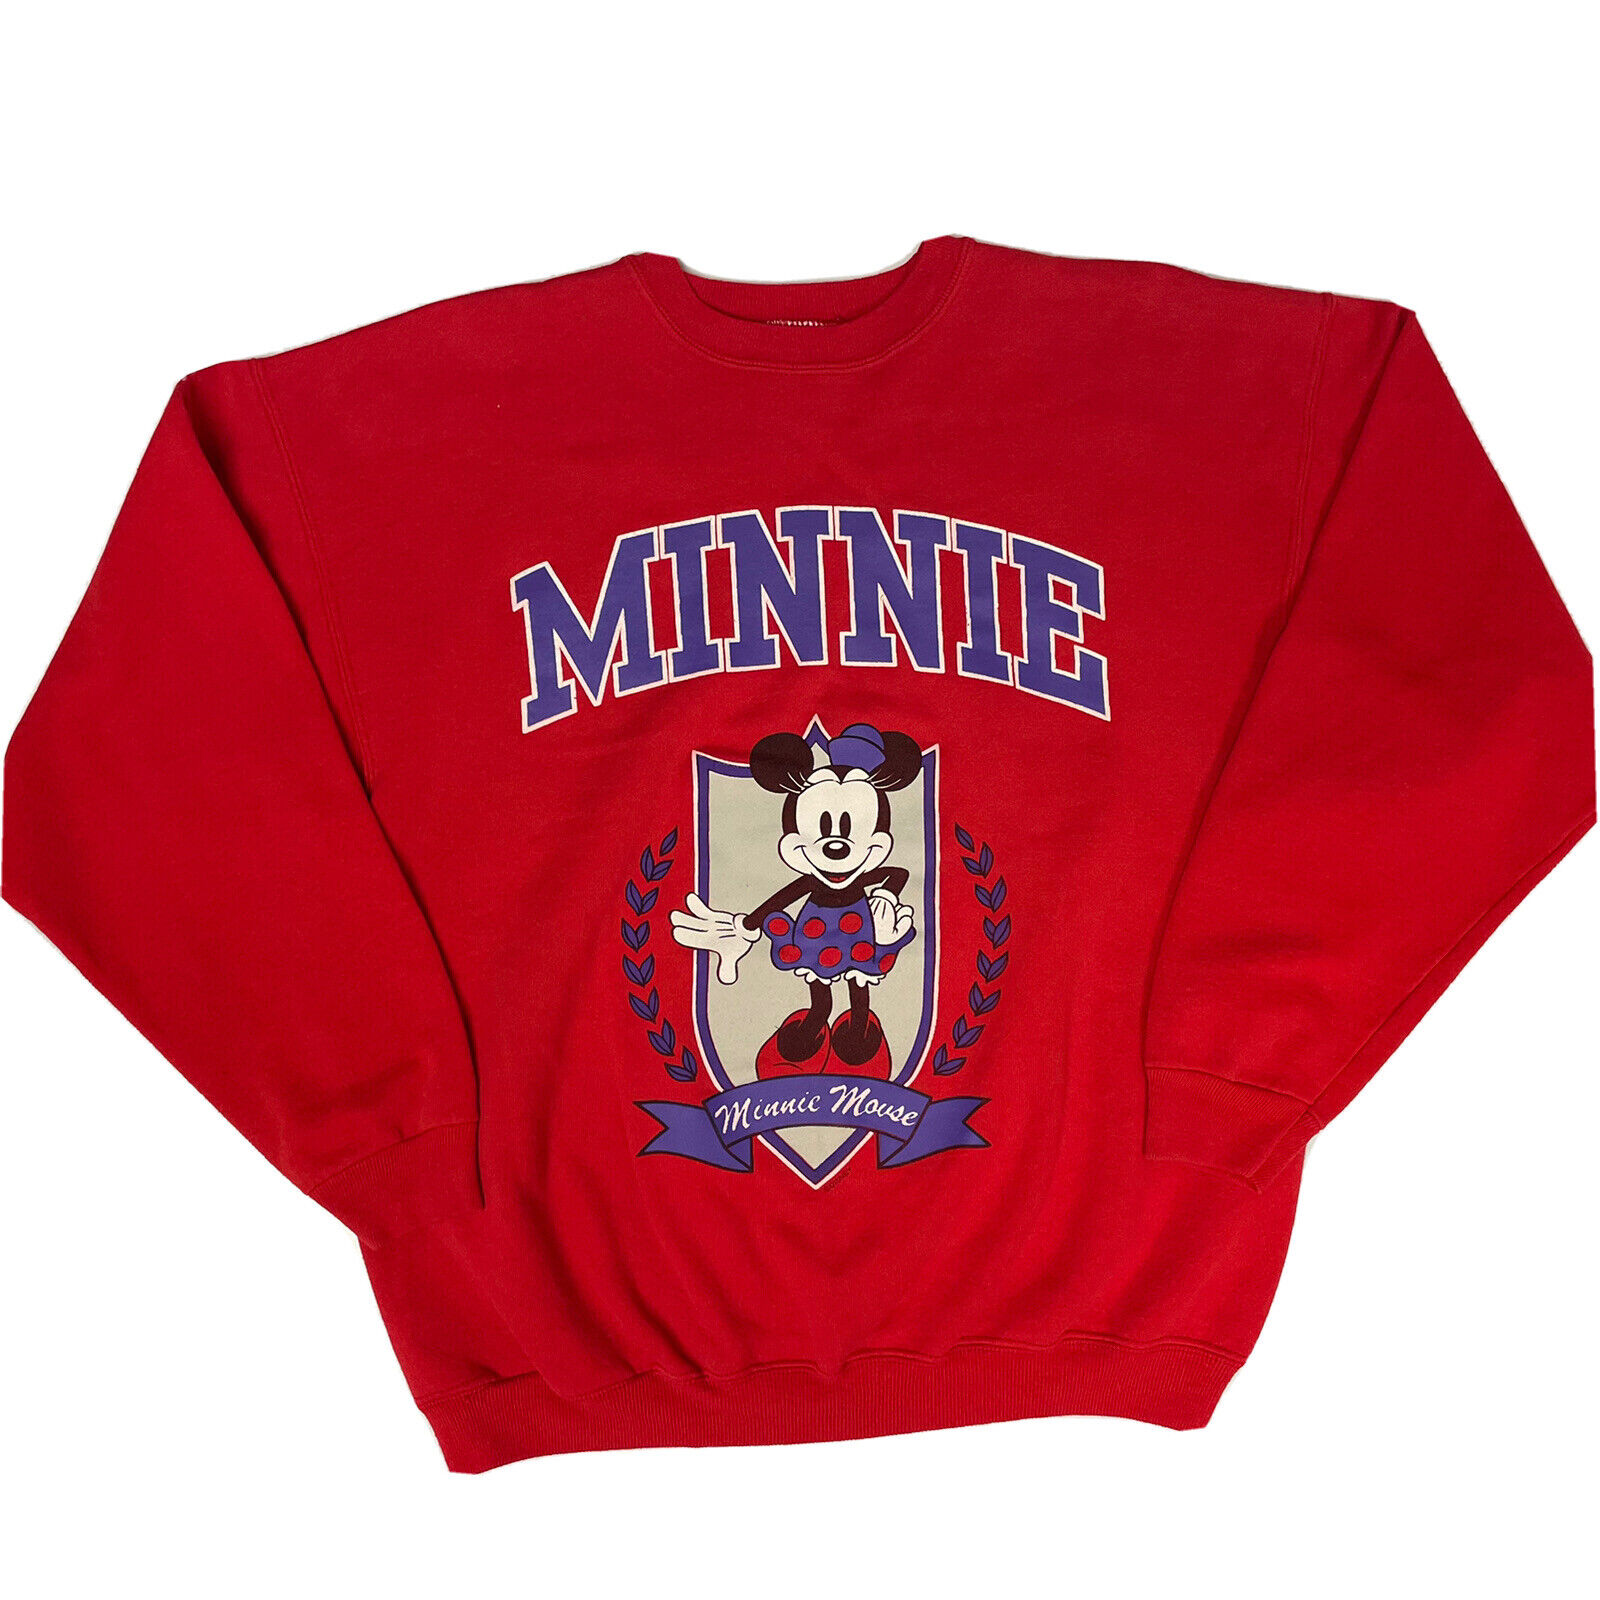 Vtg 80 90's MINNIE MOUSE Red University SPELLOUT Streetwear 50/50 Sweatshirt USA